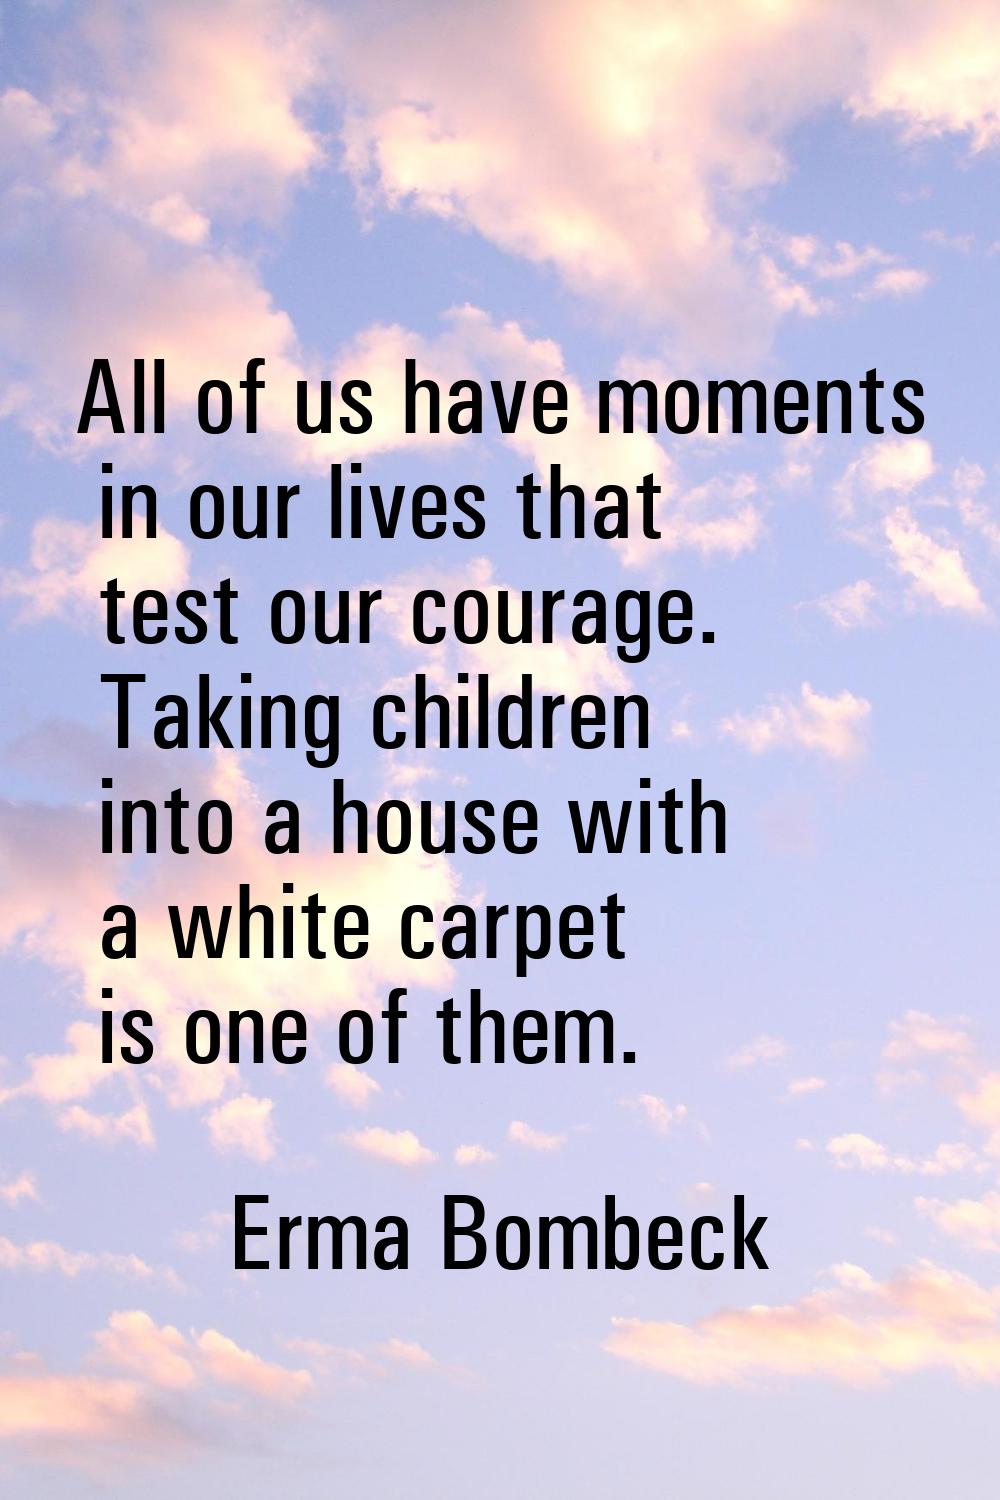 All of us have moments in our lives that test our courage. Taking children into a house with a whit